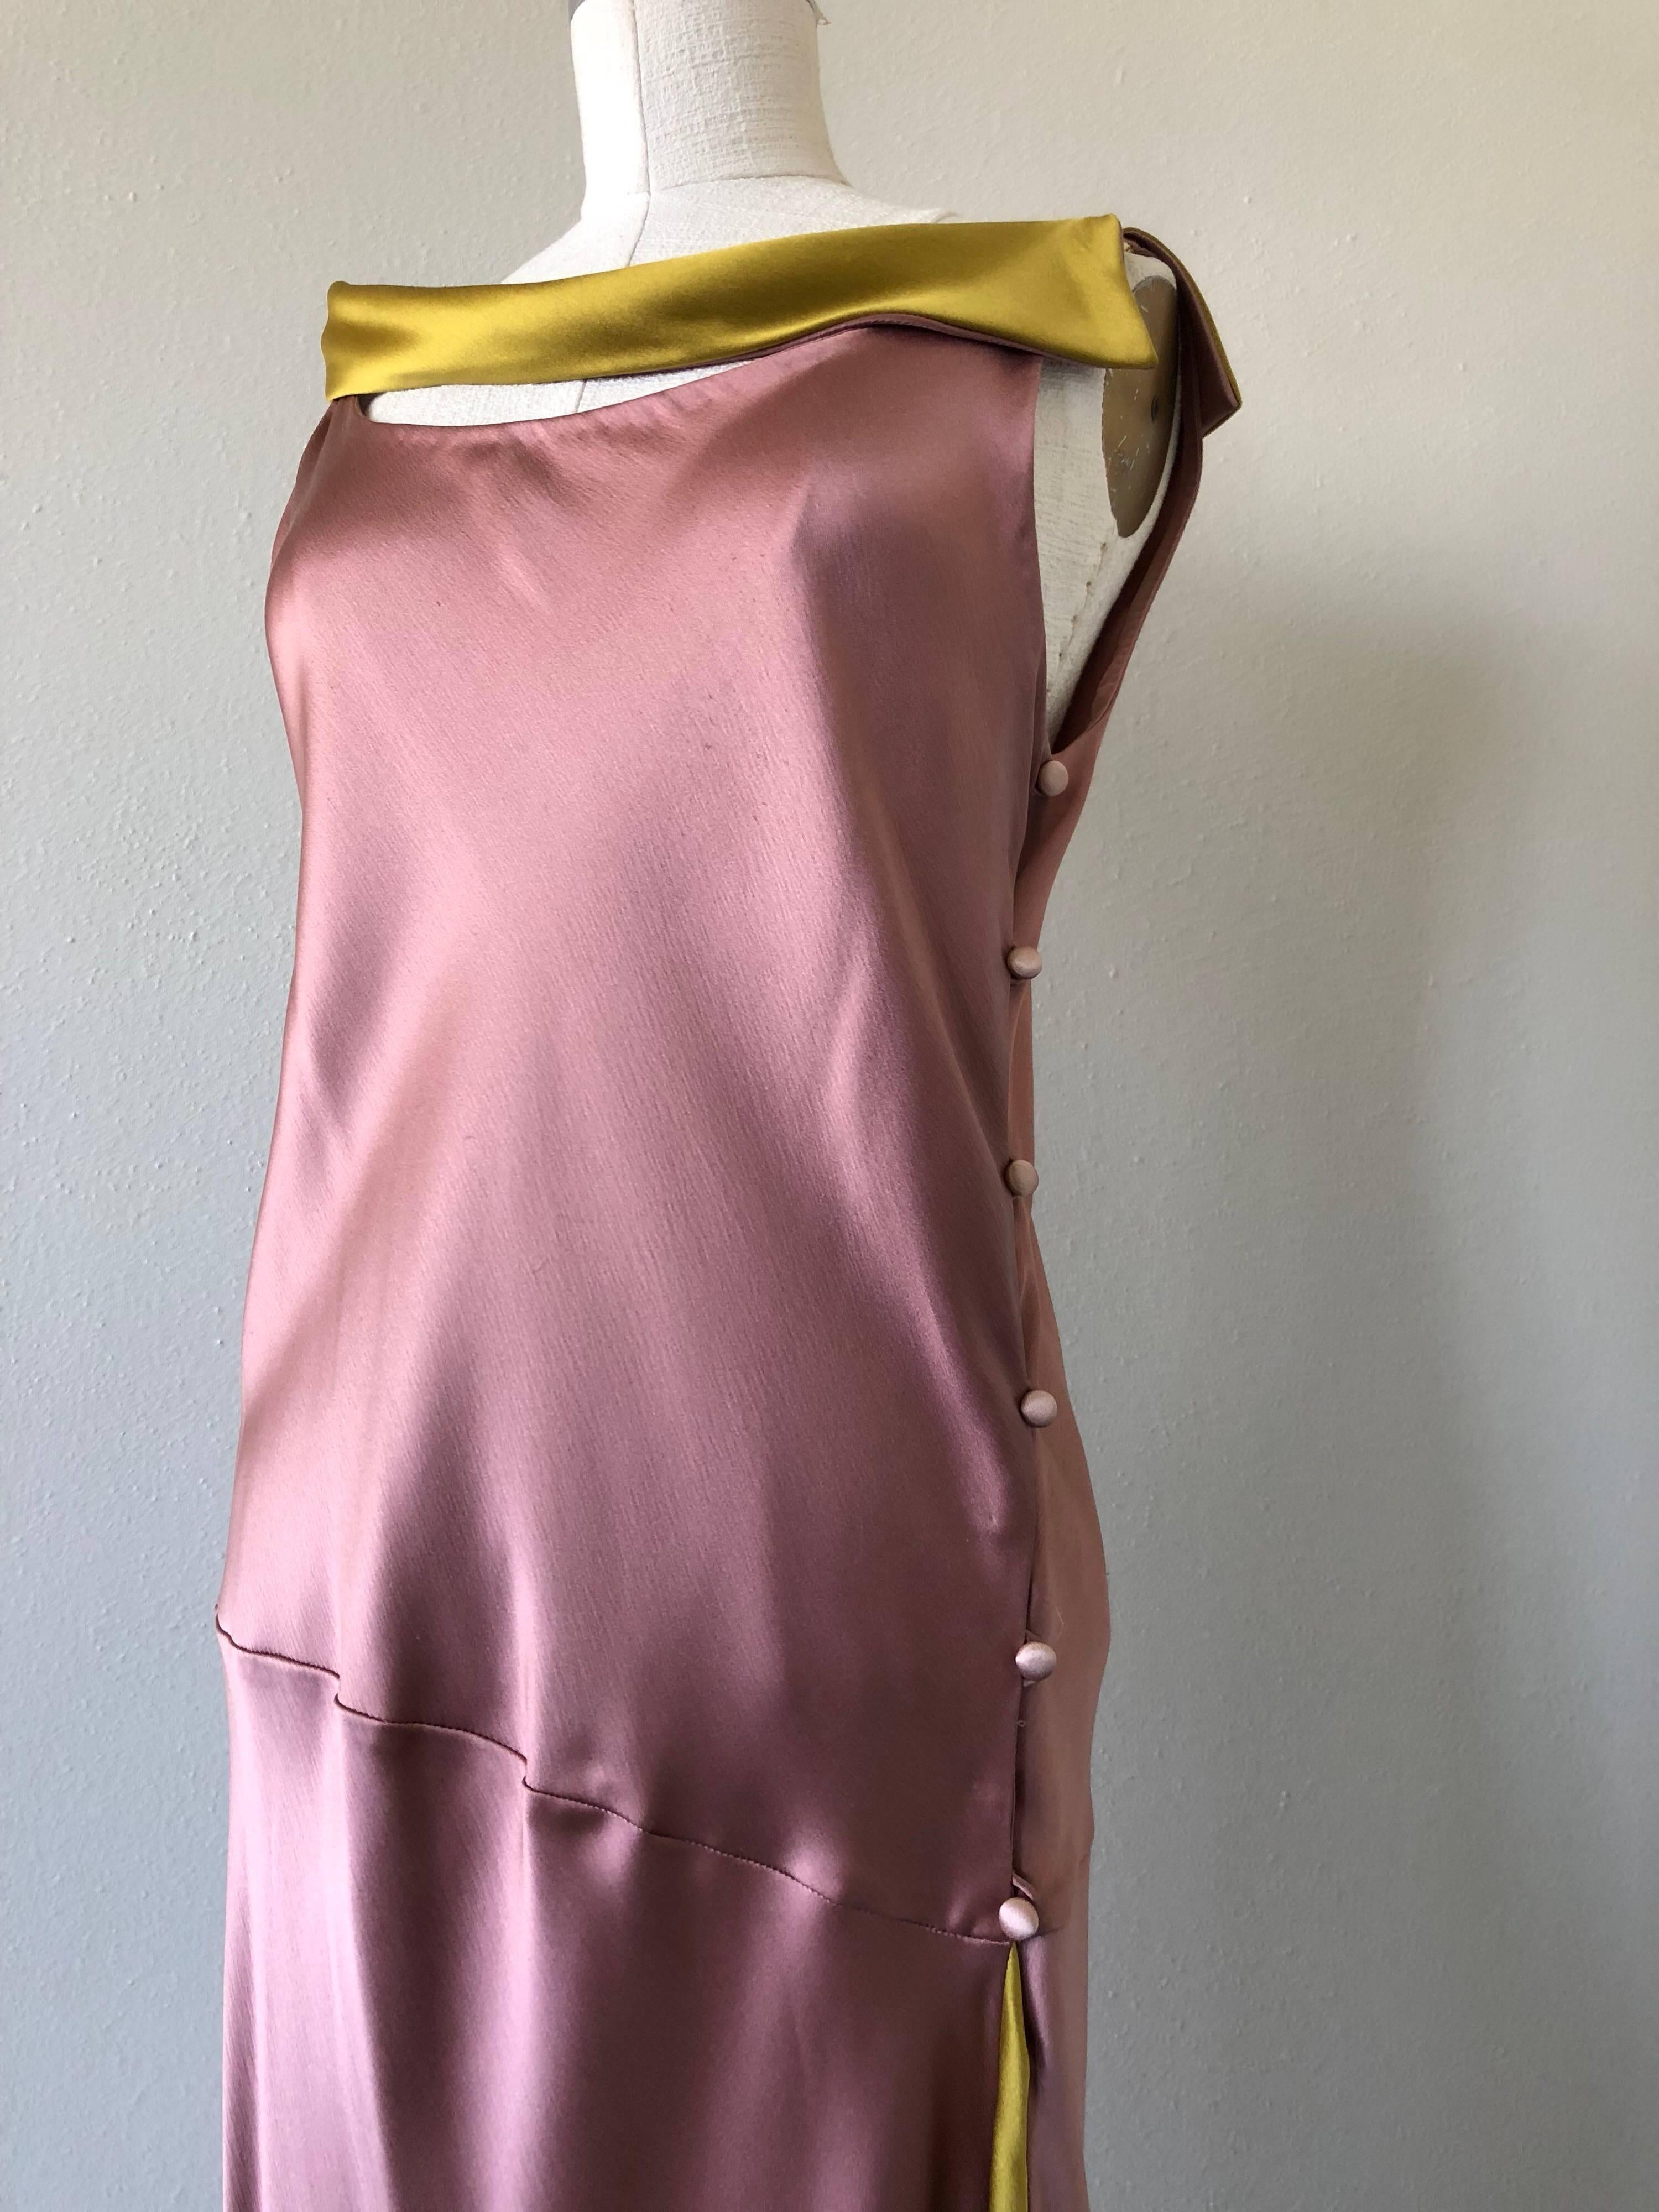 A gorgeous 1990s Bill Blass 2-tone silk charmeuse dress in mauve and burnished gold:  Bias cut with buttons down the side, this beautiful dress features a burnished gold satin side-slung collar piece and an inset flared panel  at the side. 